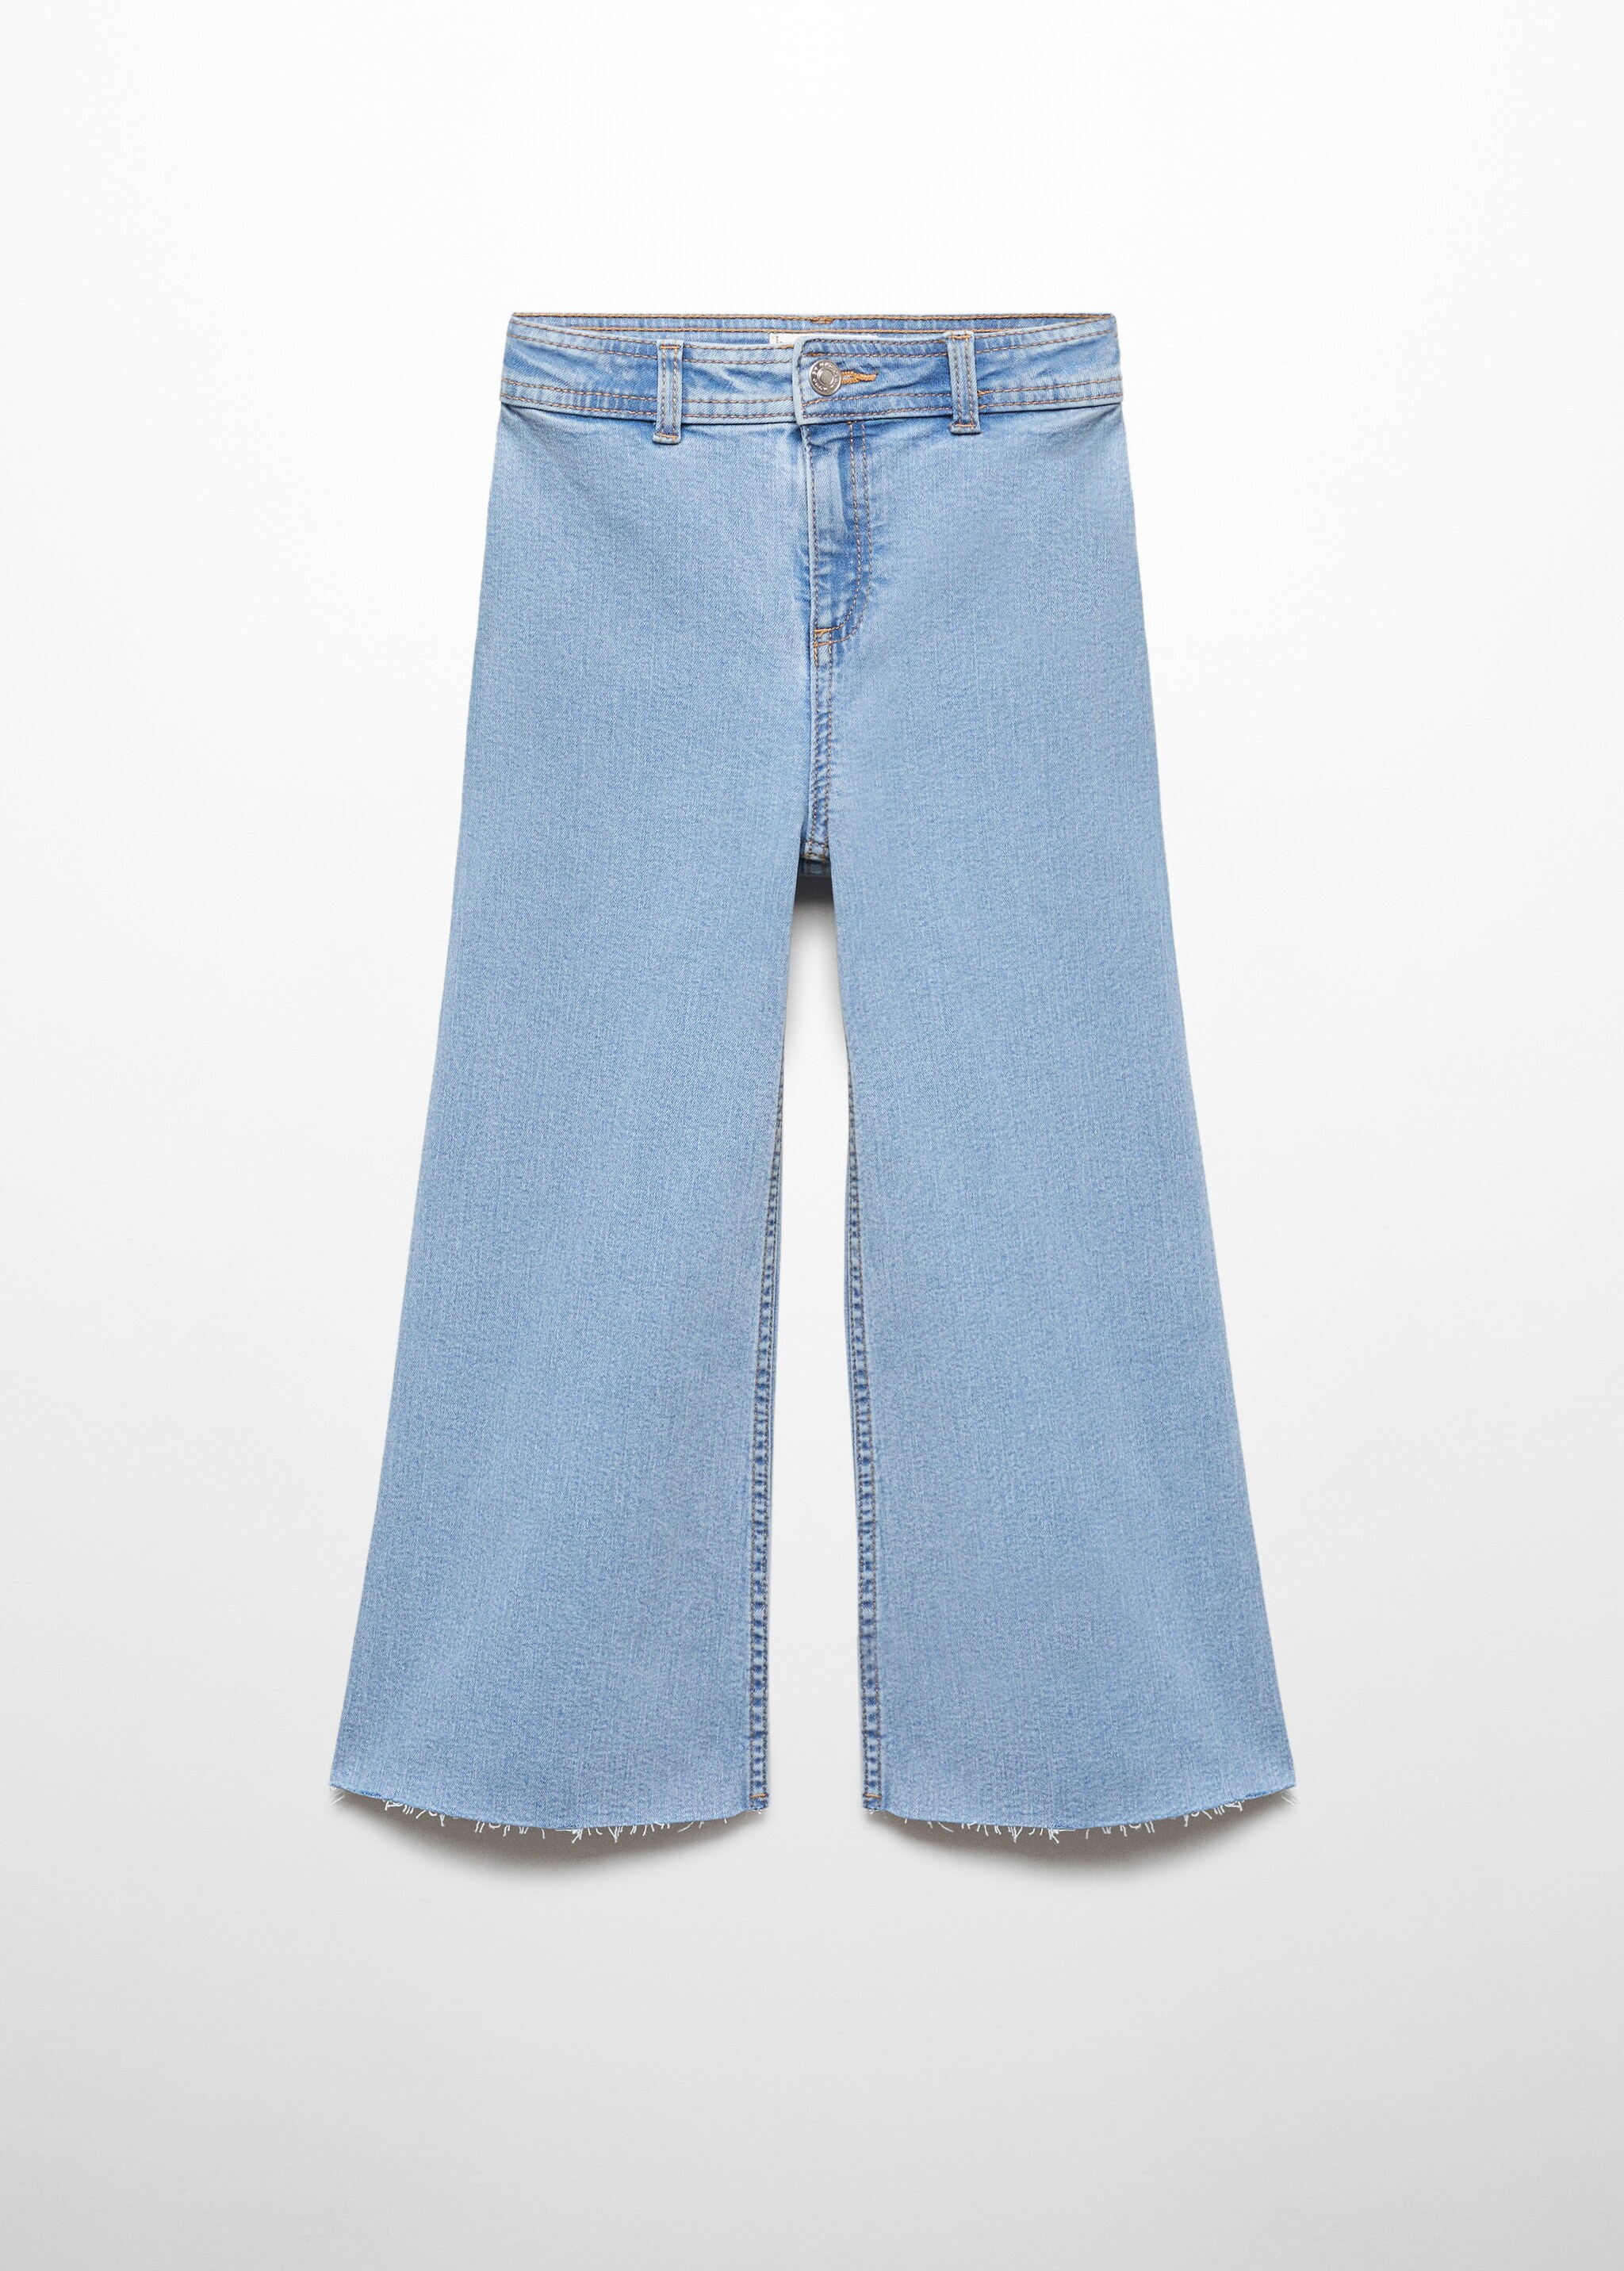 Jeans culotte high waist - Article without model